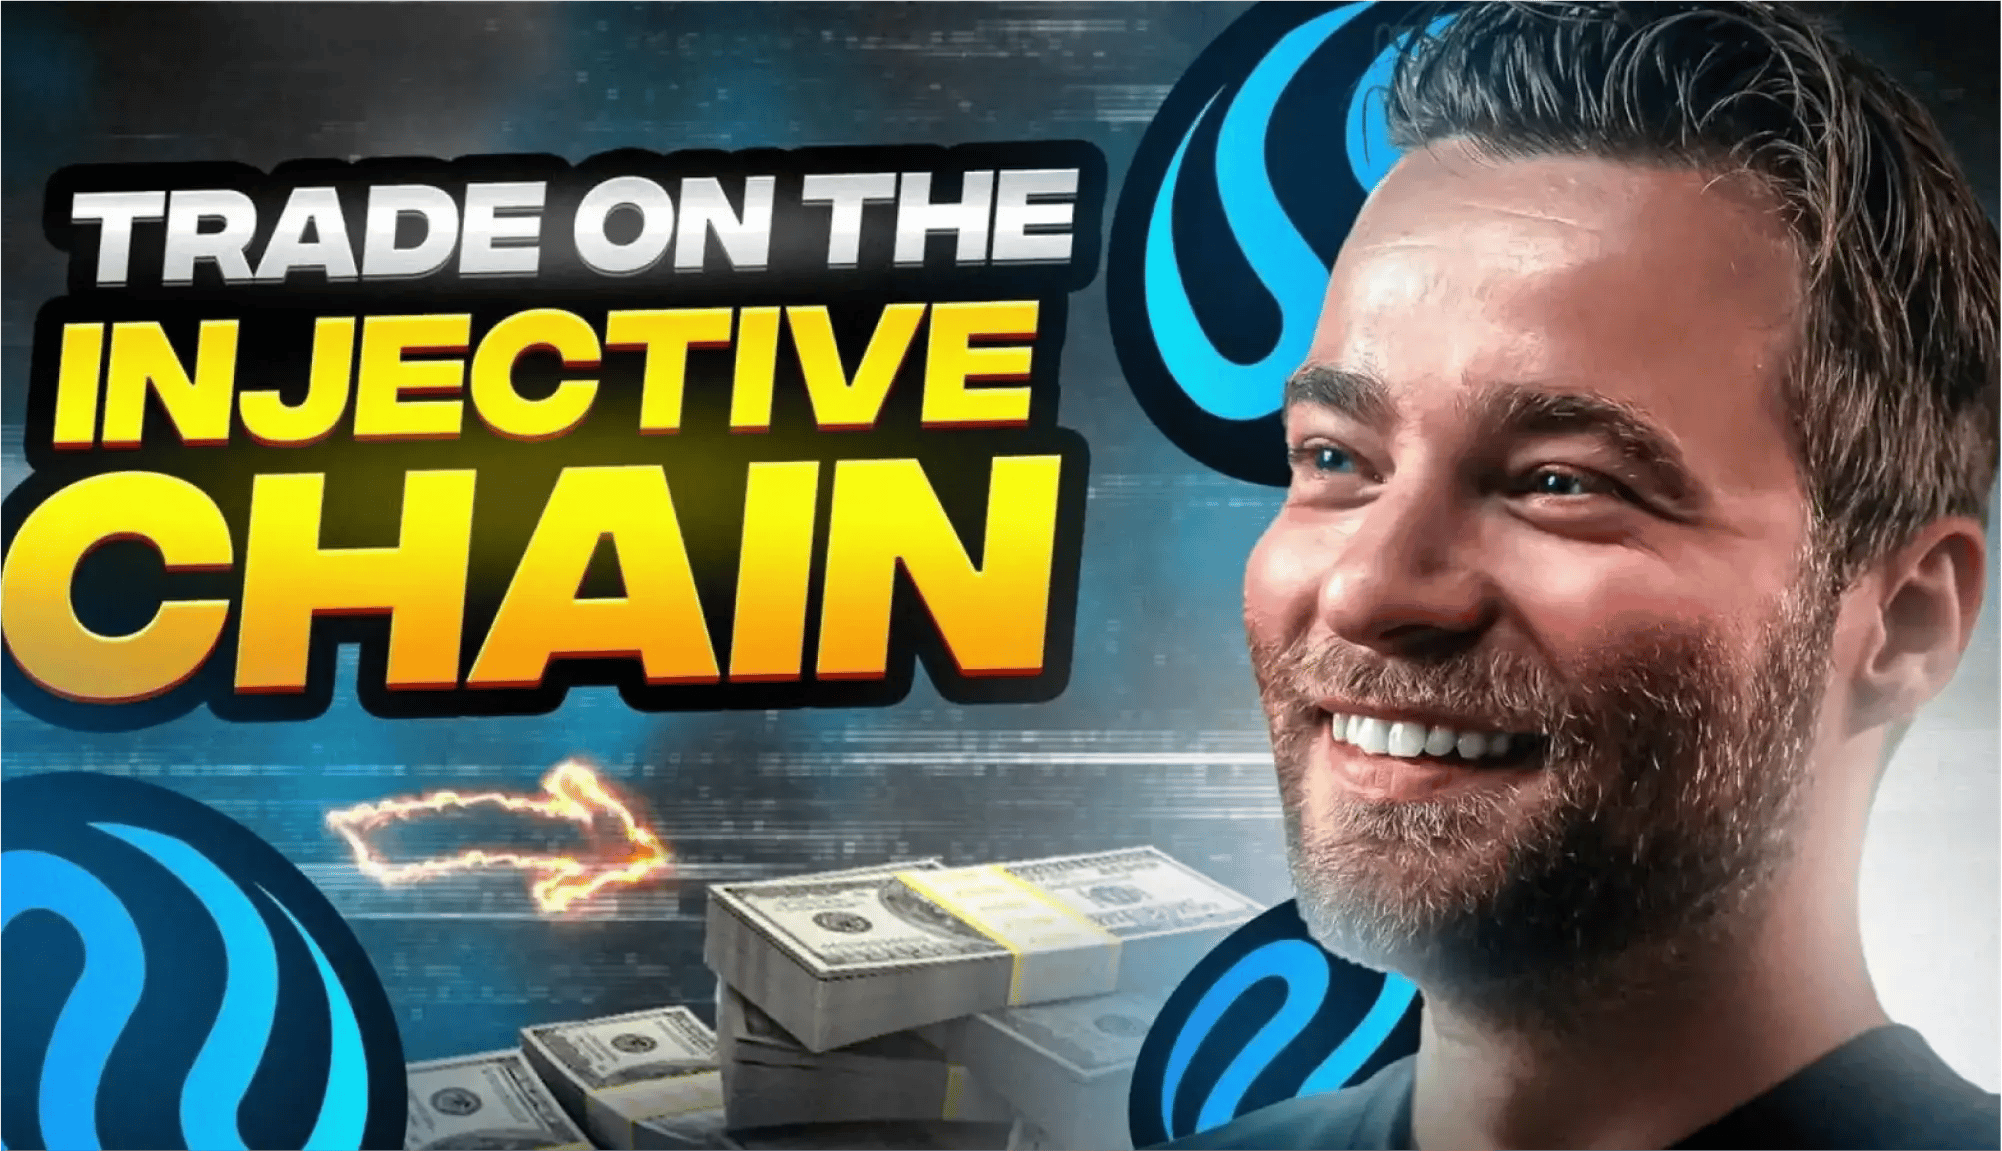 How to Trade on the Injective Chain